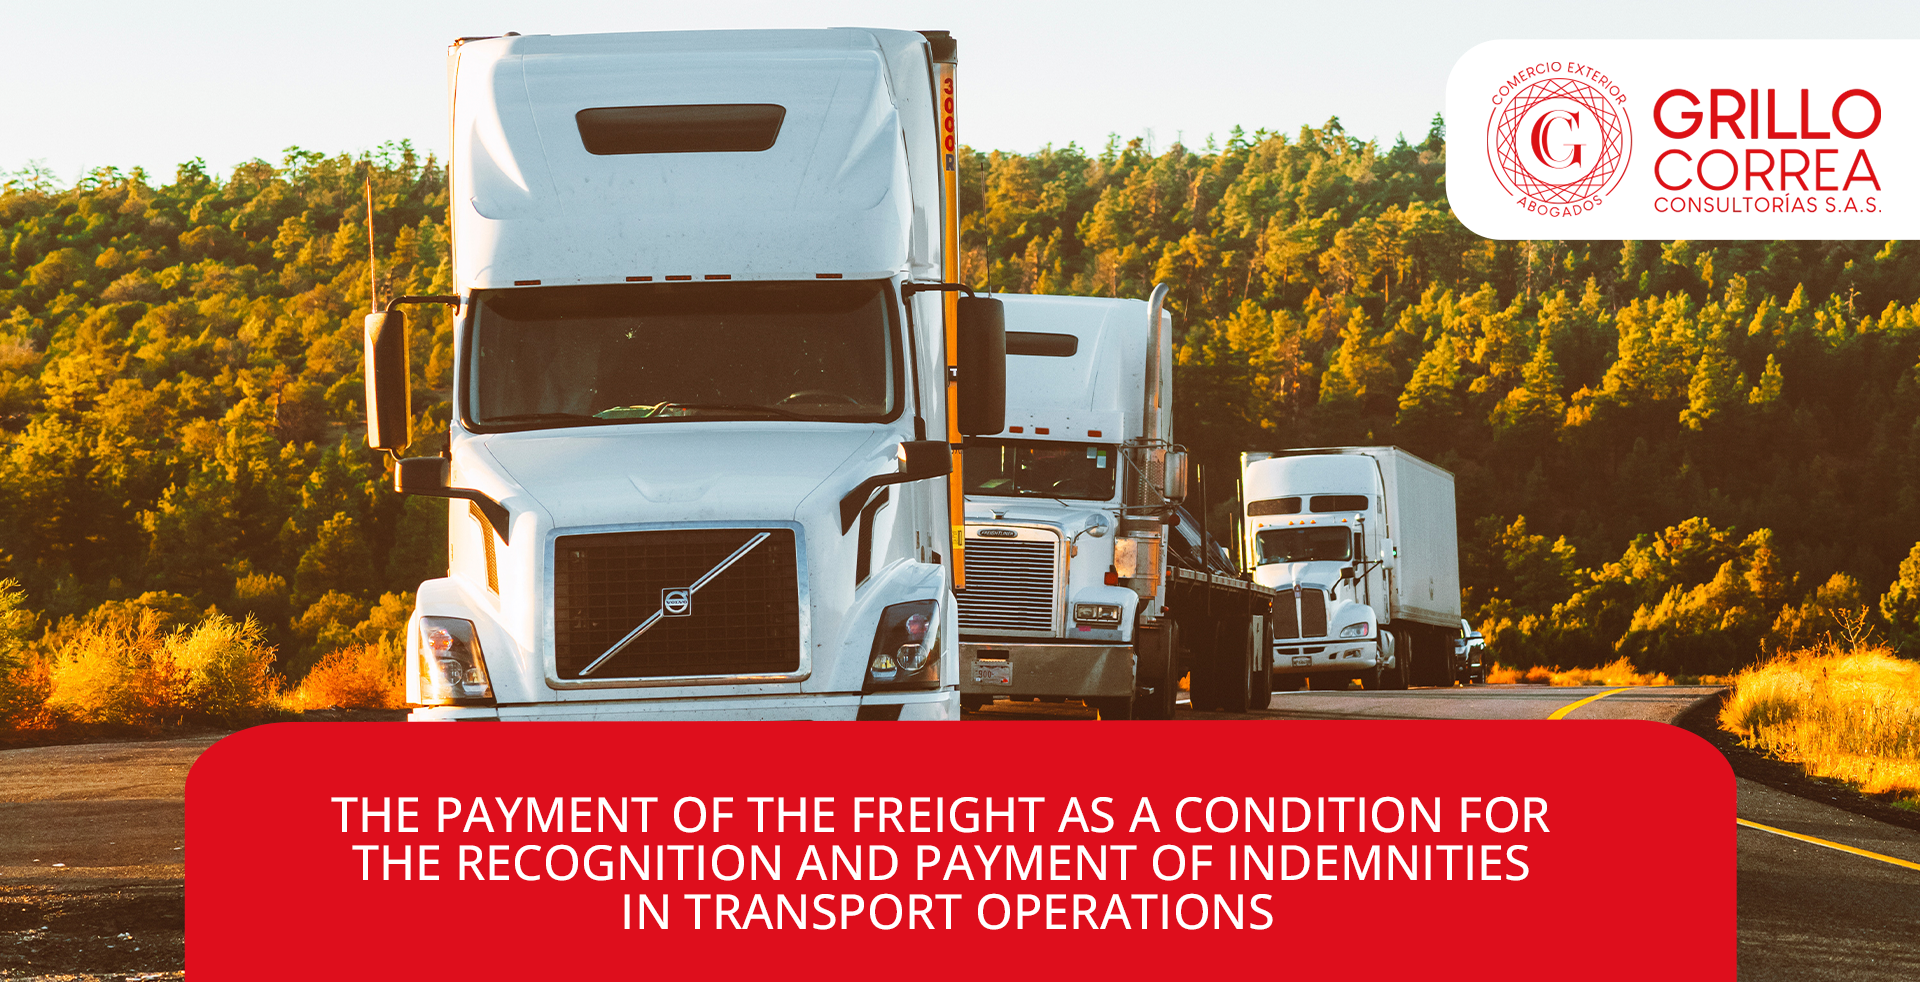 THE PAYMENT OF THE FREIGHT AS A CONDITION FOR THE RECOGNITION AND PAYMENT OF INDEMNITIES IN TRANSPORT OPERATIONS